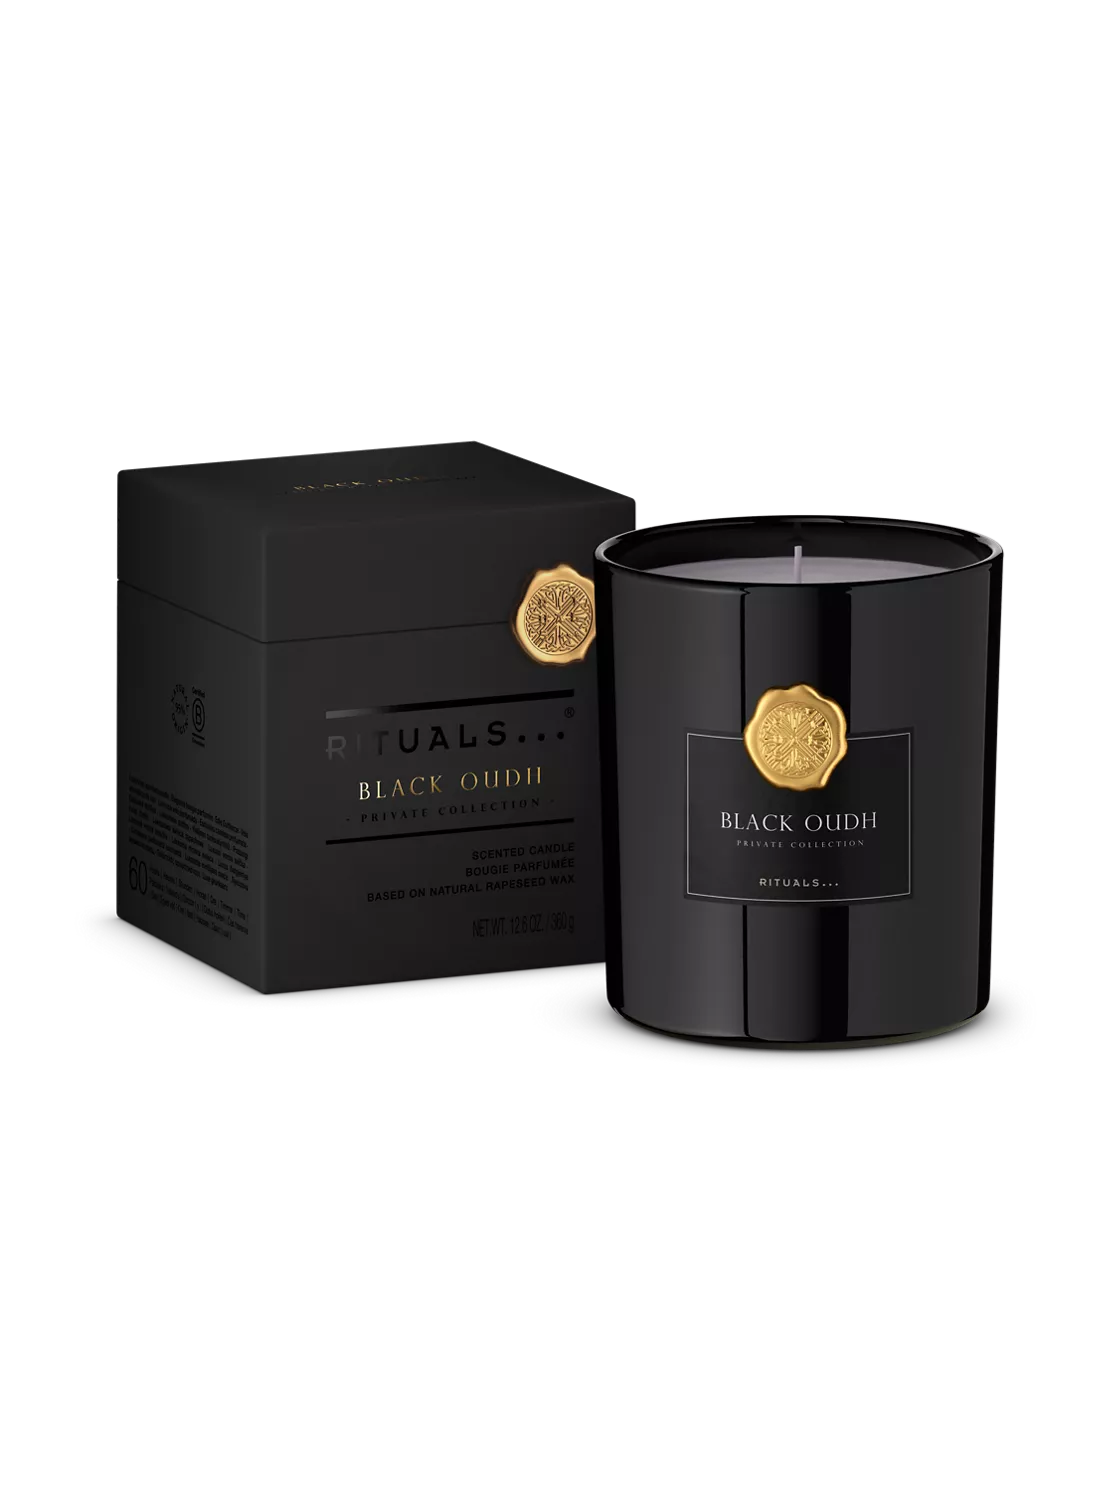 https://rituals.scene7.com/is/image/rituals/1116154-rituals-blackoudh-scentedcandle-360g-pack-closed:3-by-4?fmt=webp-alpha&hei=1488&resMode=sharp2&wid=1116